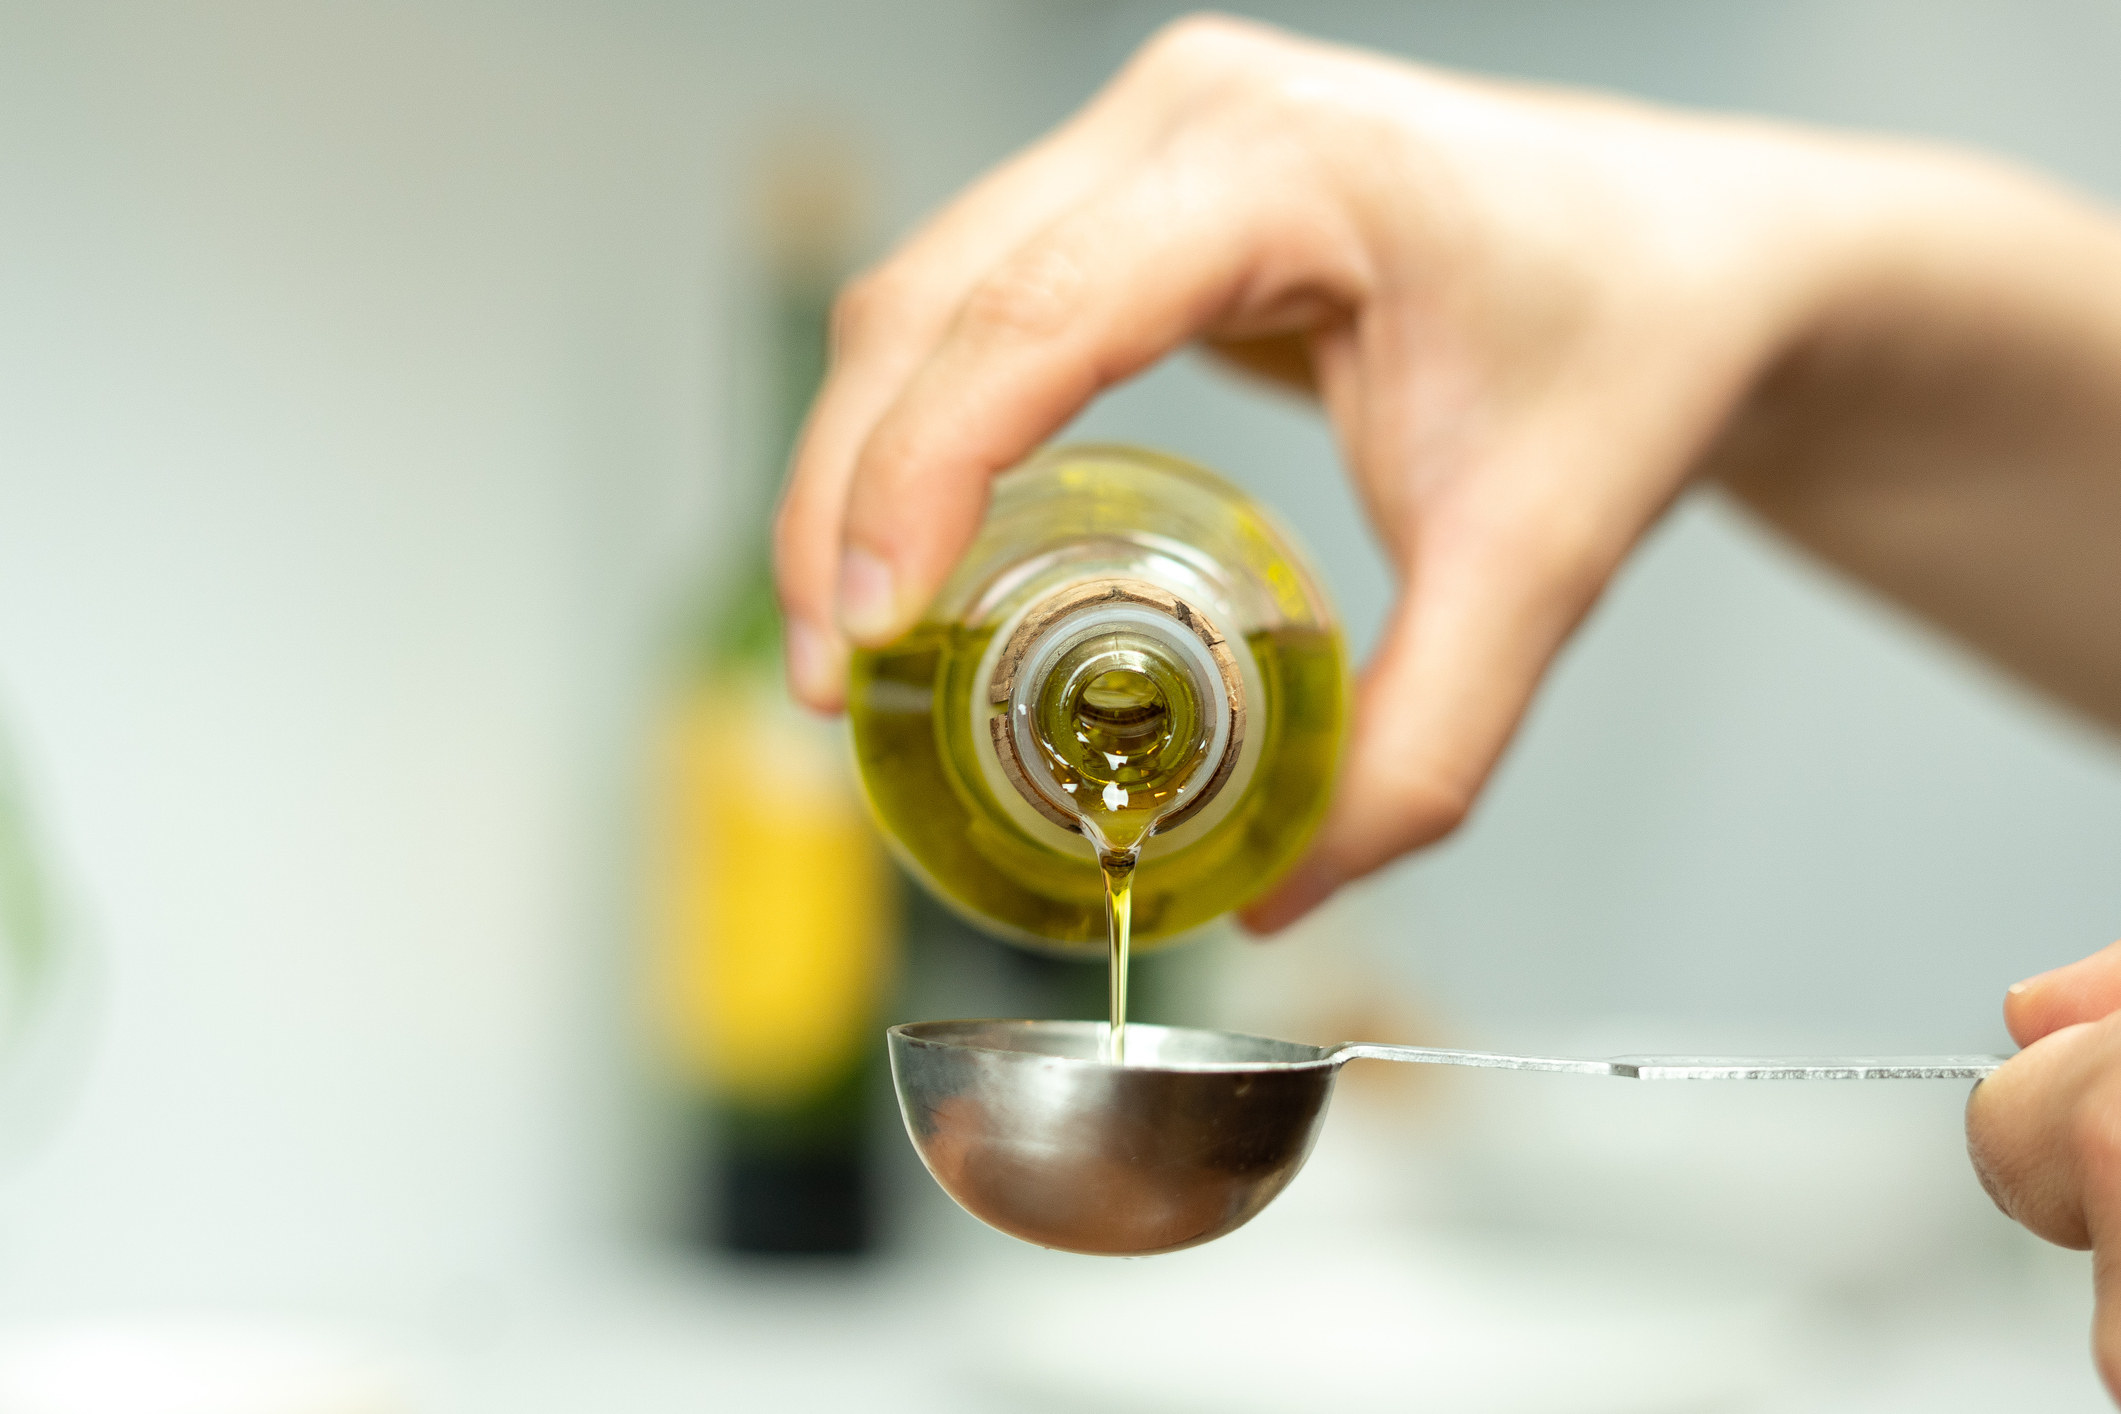 Measuring olive oil into a spoon